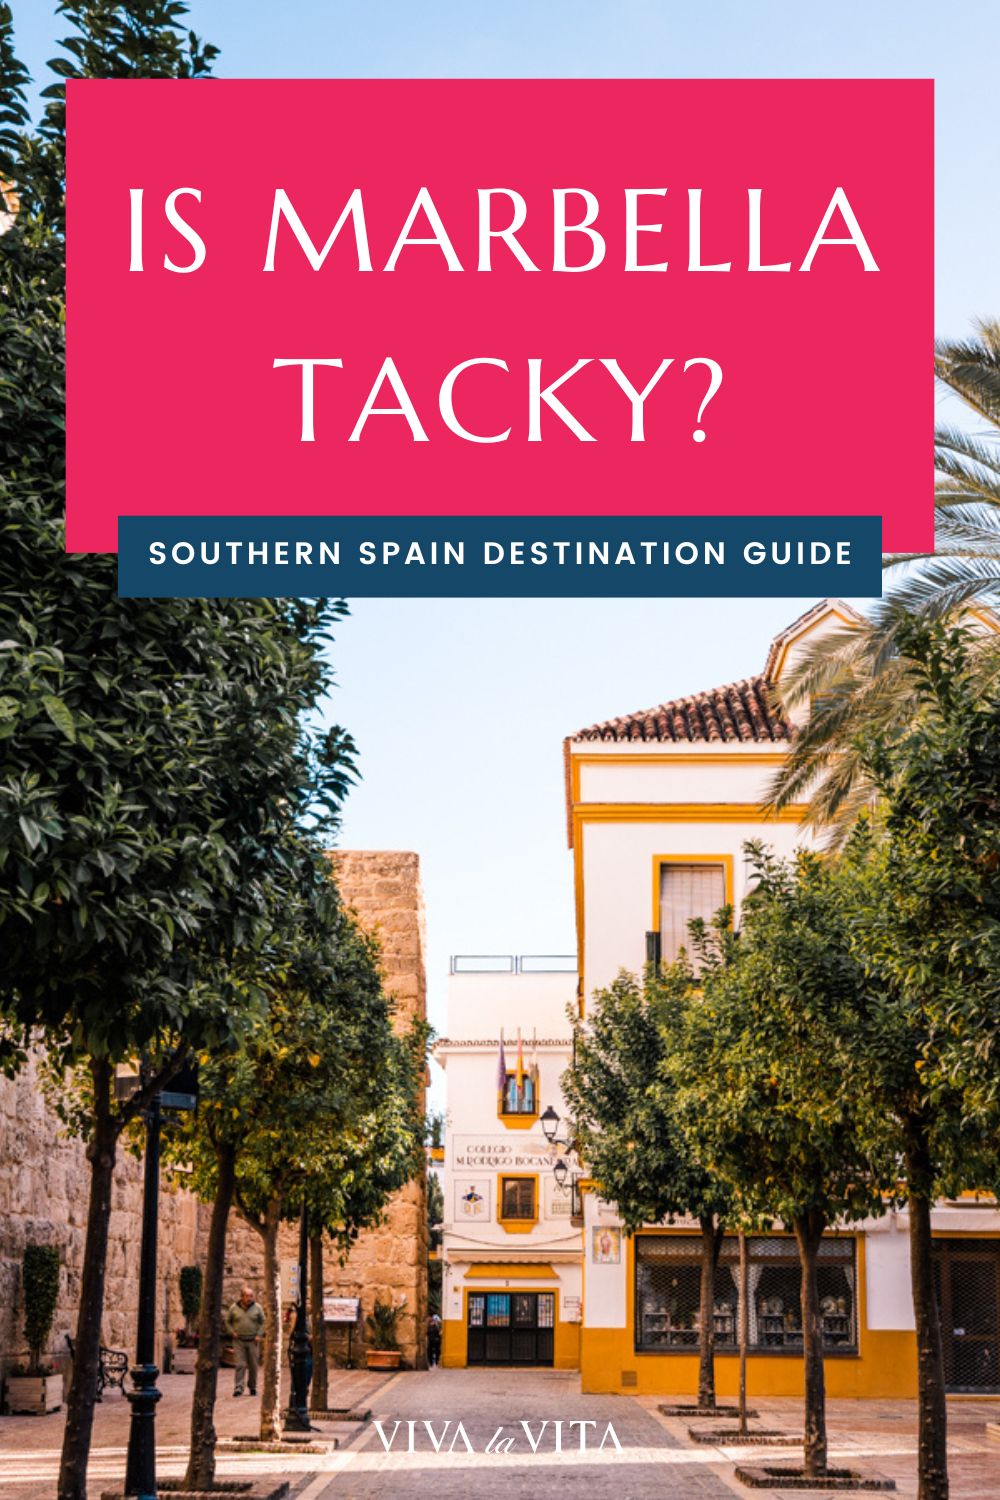 pinterest image with a square in marbella old town showing a headline - is marbella tacky?